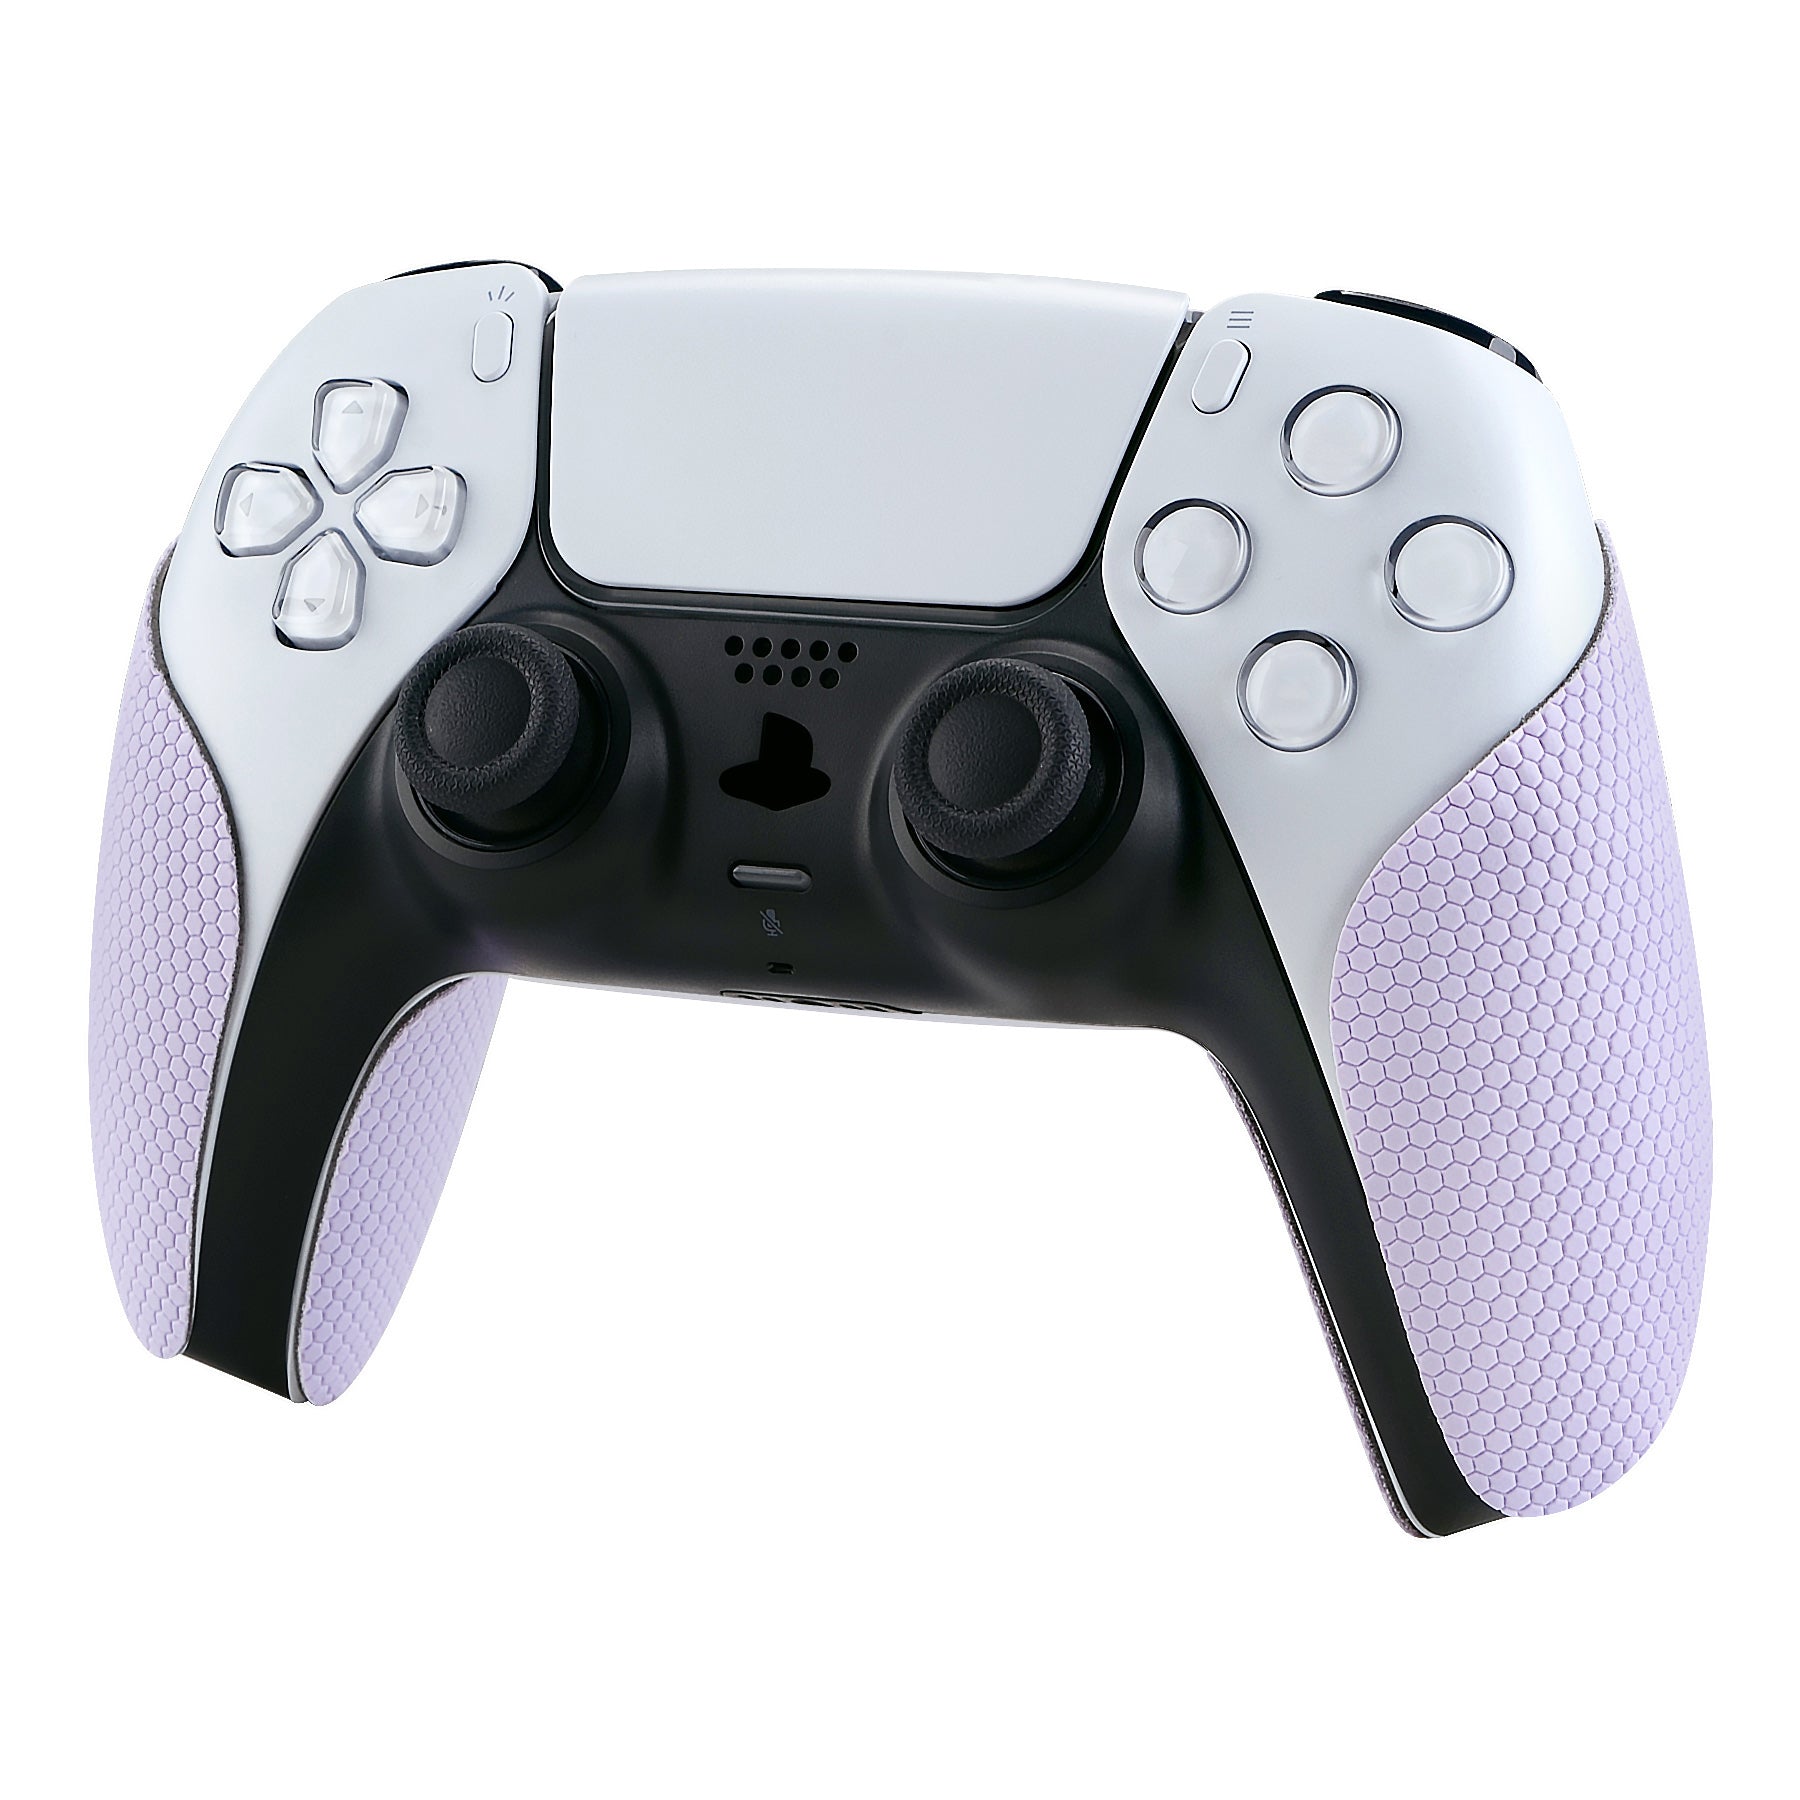 PlayVital Mauve Purple Anti-Skid Sweat-Absorbent Controller Grip for PS5 Controller, Professional Textured Soft Rubber Pads Handle Grips for PS5 Controller - PFPJ023 PlayVital